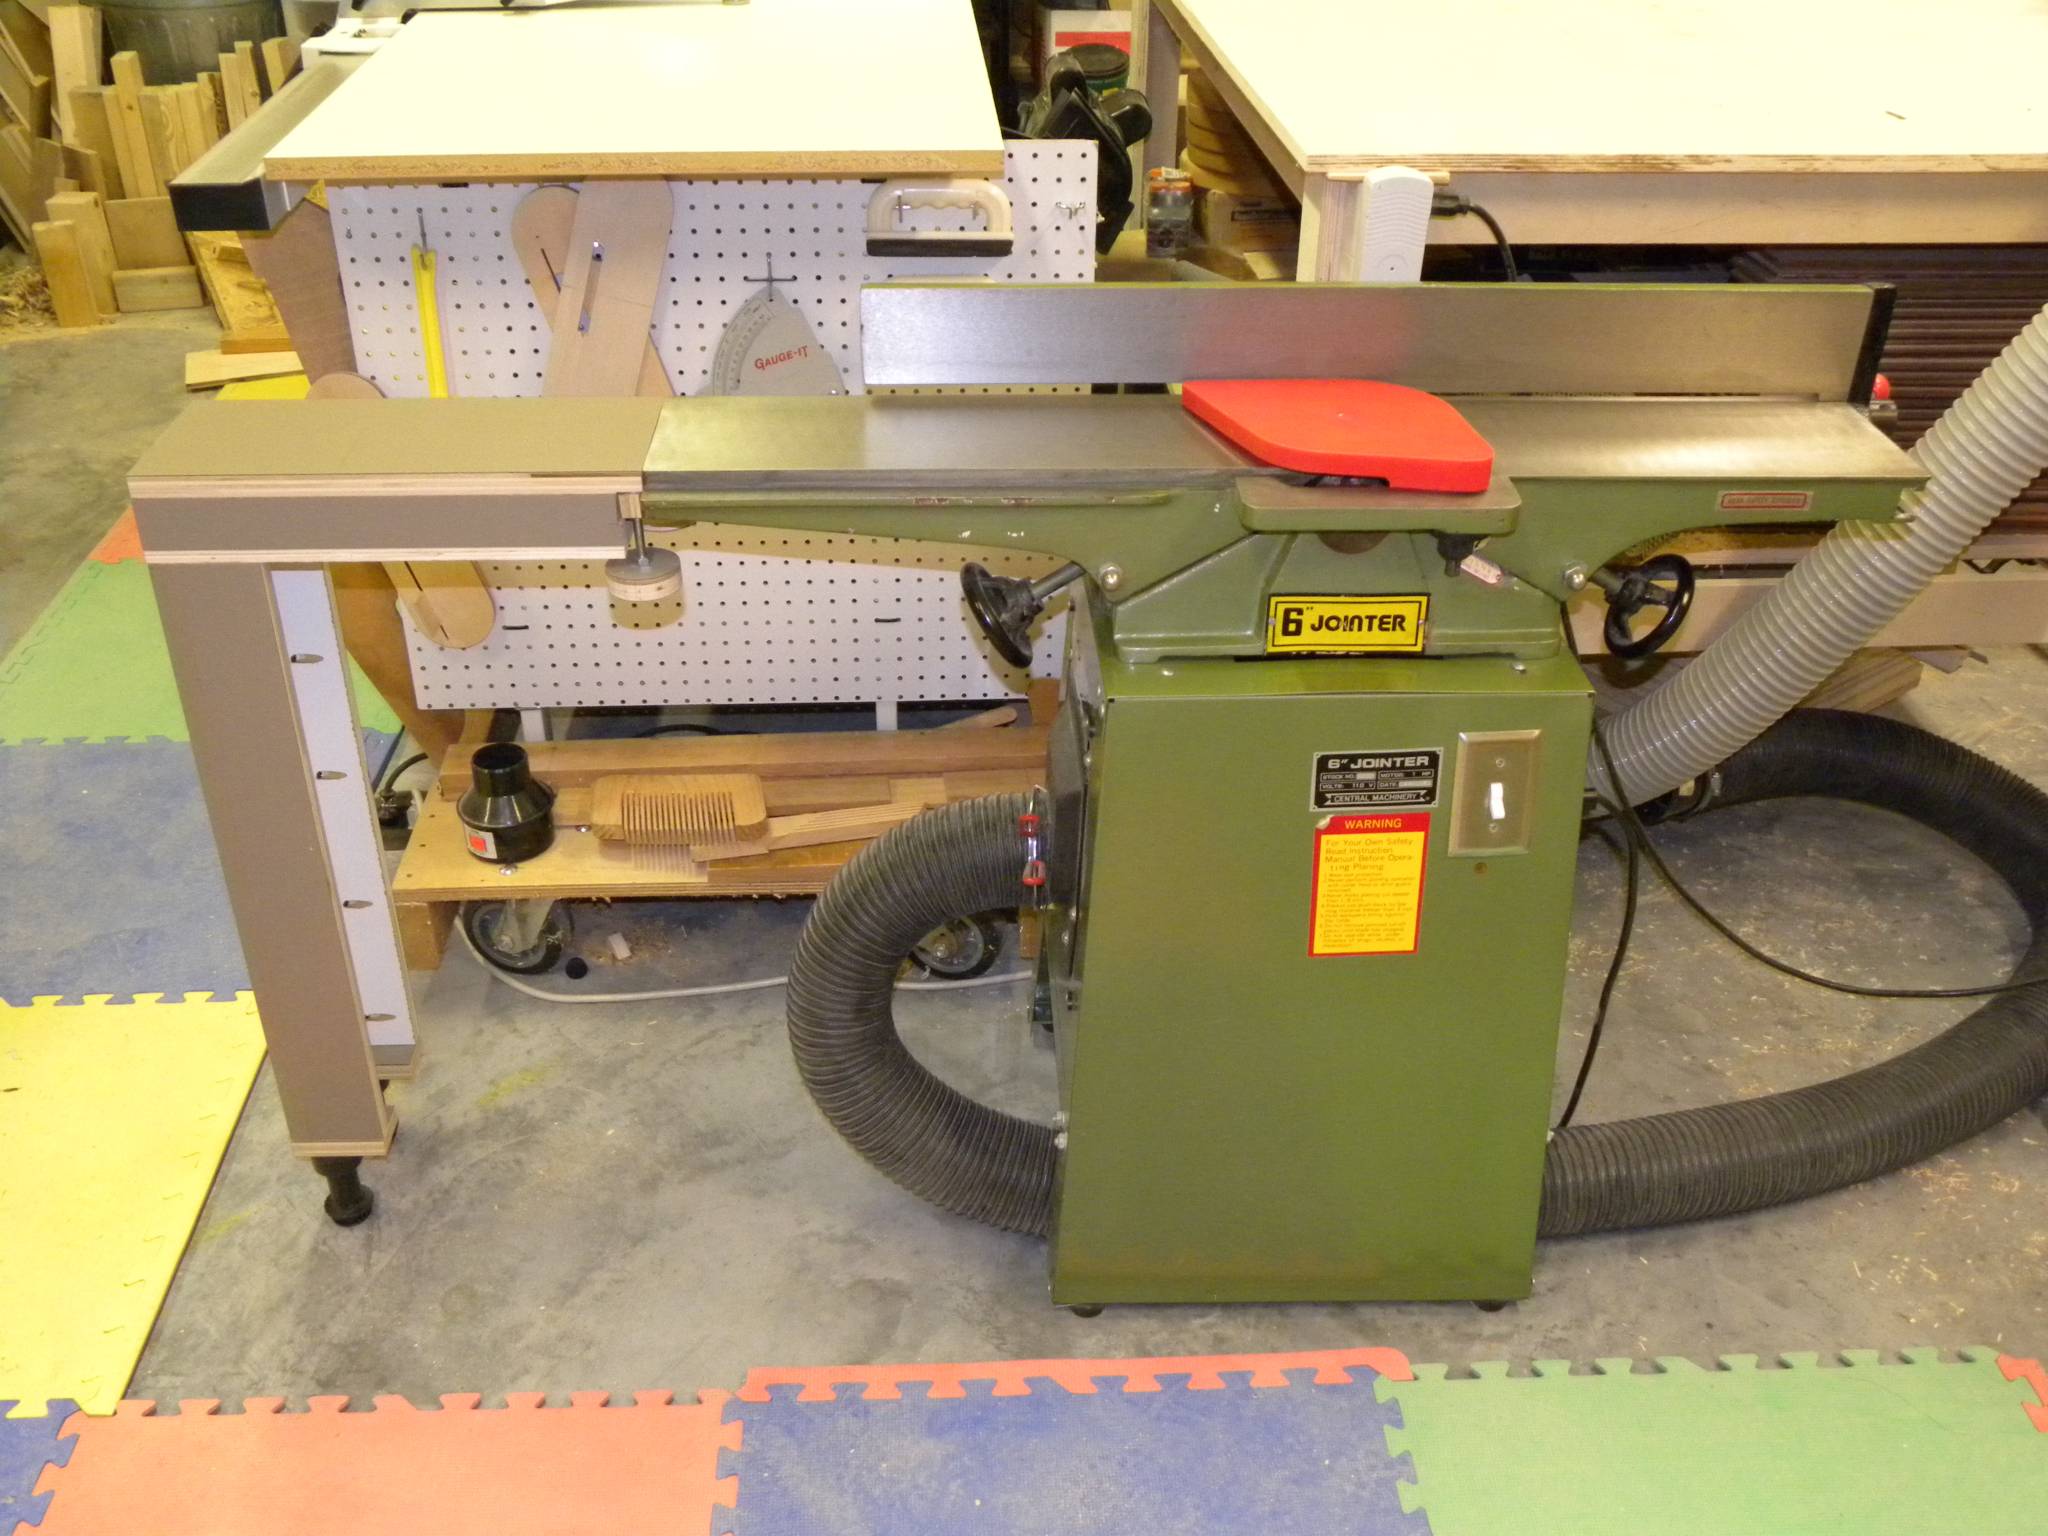 6" jointer with extension